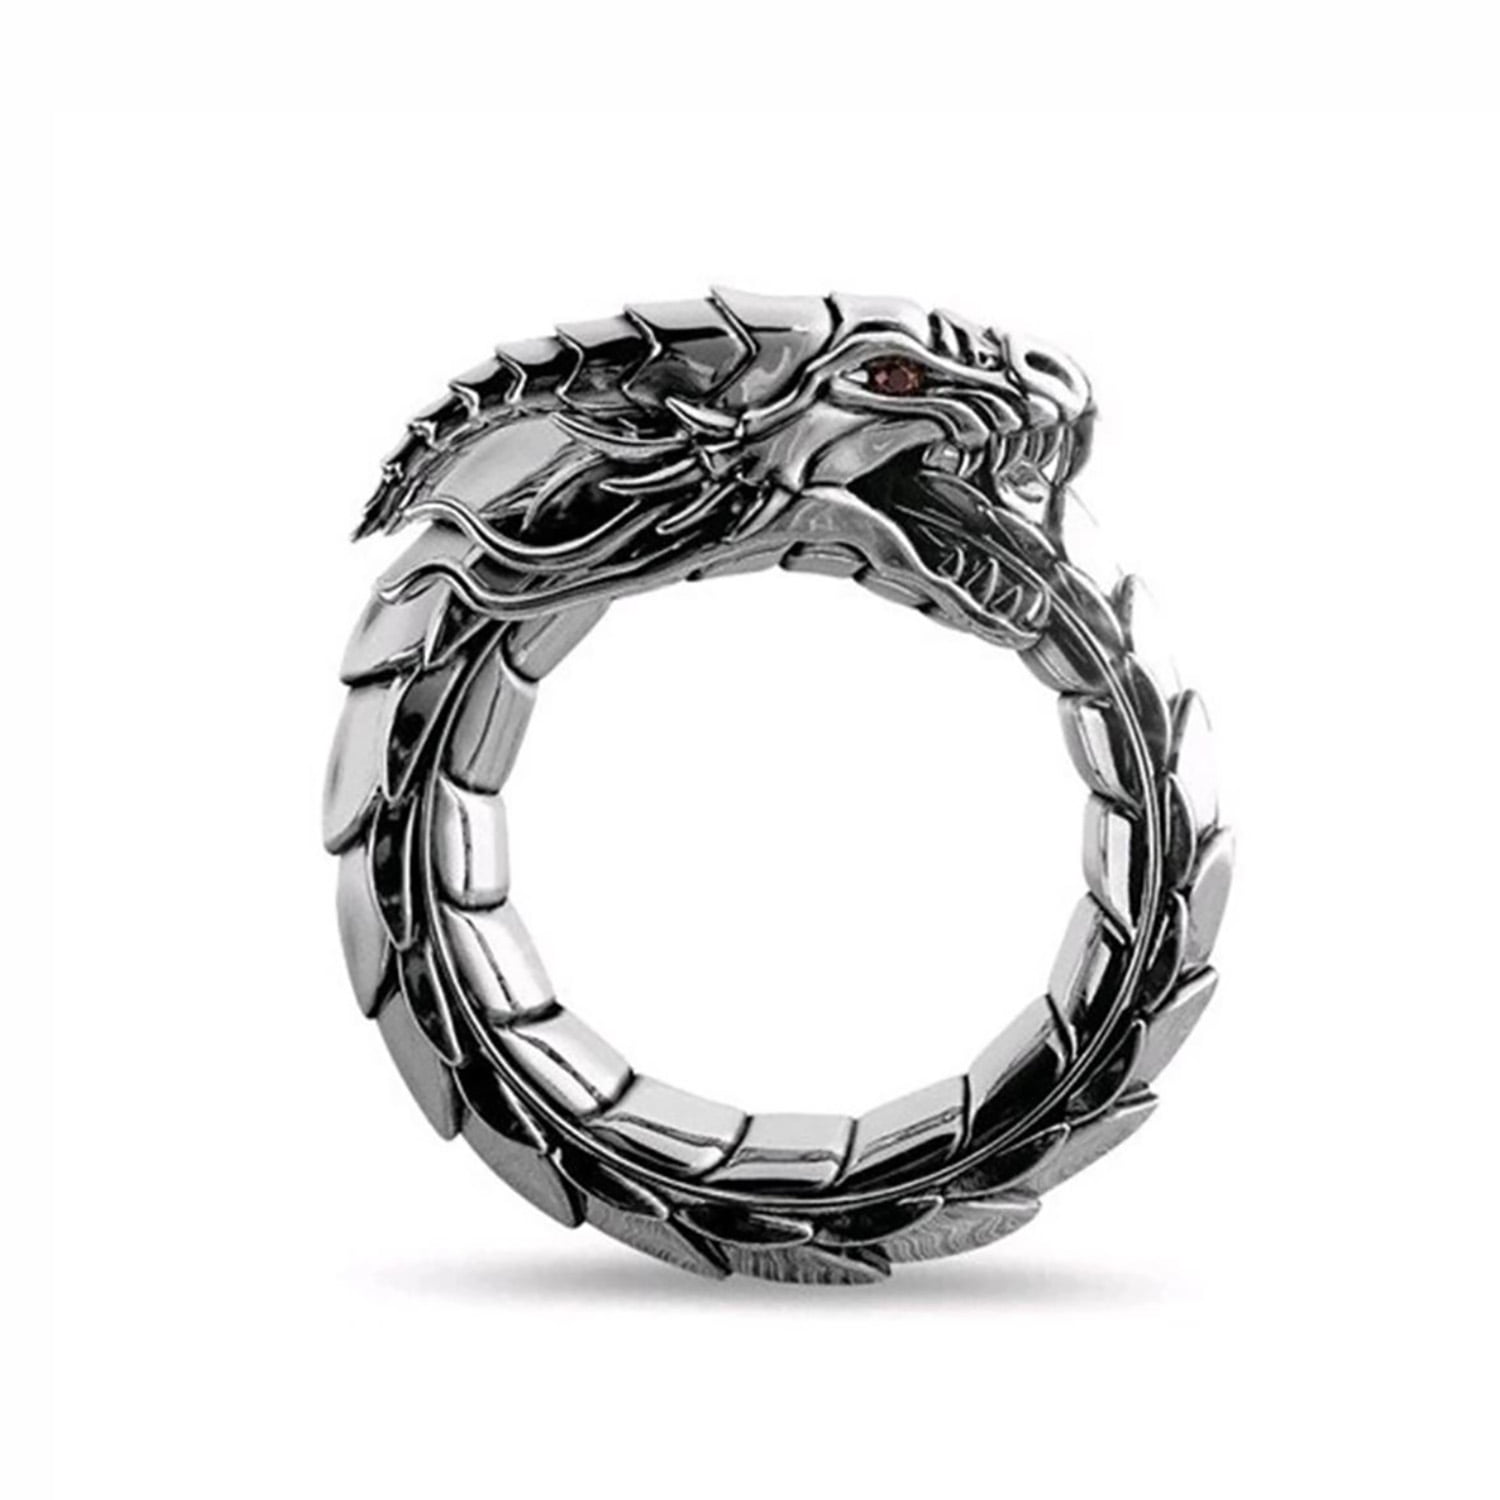 vitaliteit nieuws spoelen Dragon Ring for Men or Women Stainless Steel Punk Gothic Mythical Fantasy  Fashion Jewelry by Ginger Lyne - Walmart.com